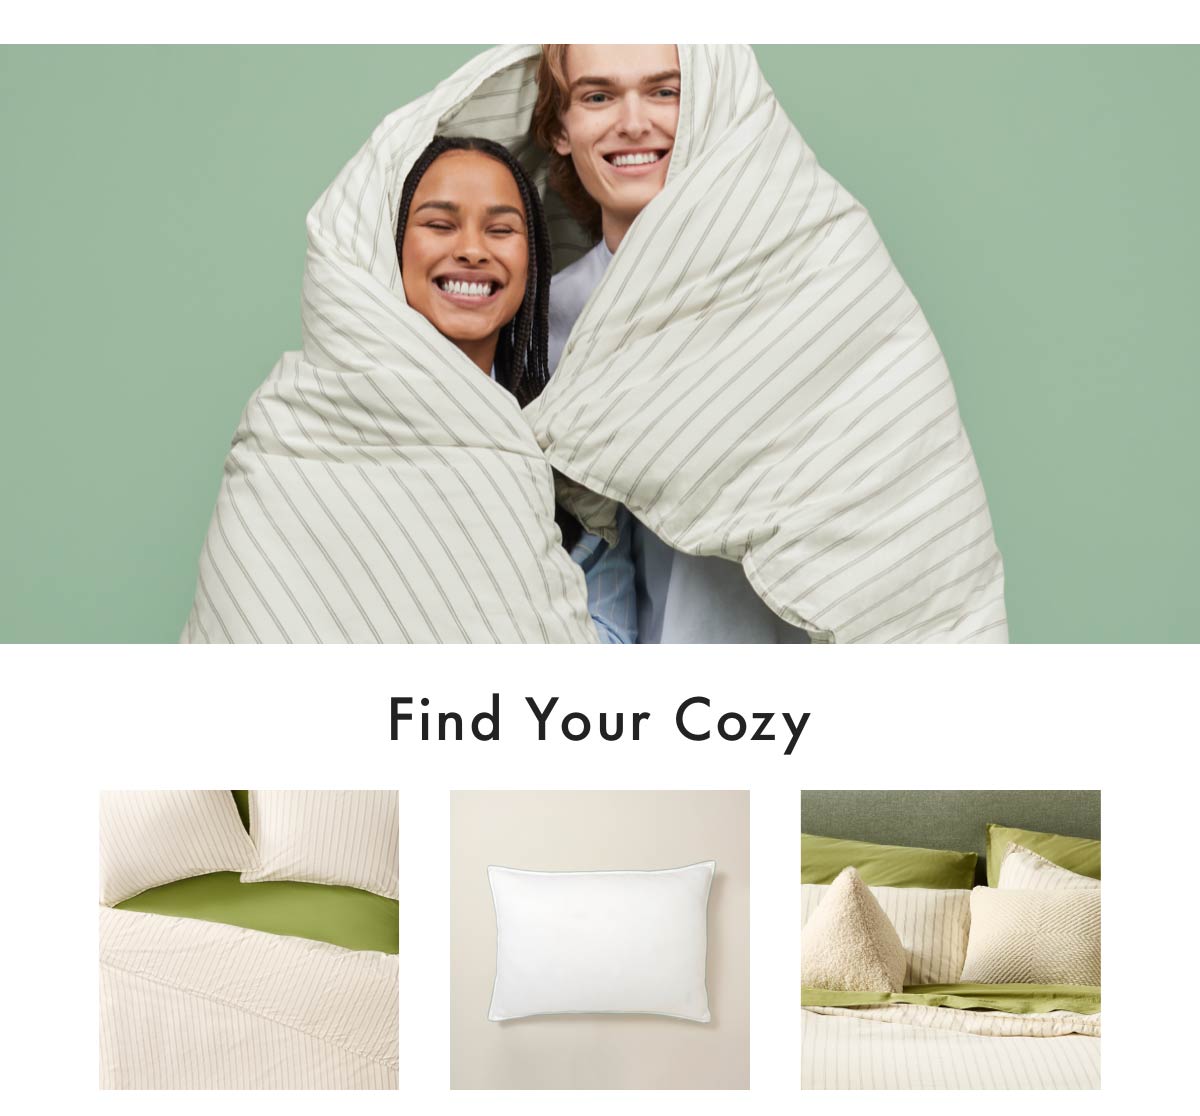 Find Your Cozy